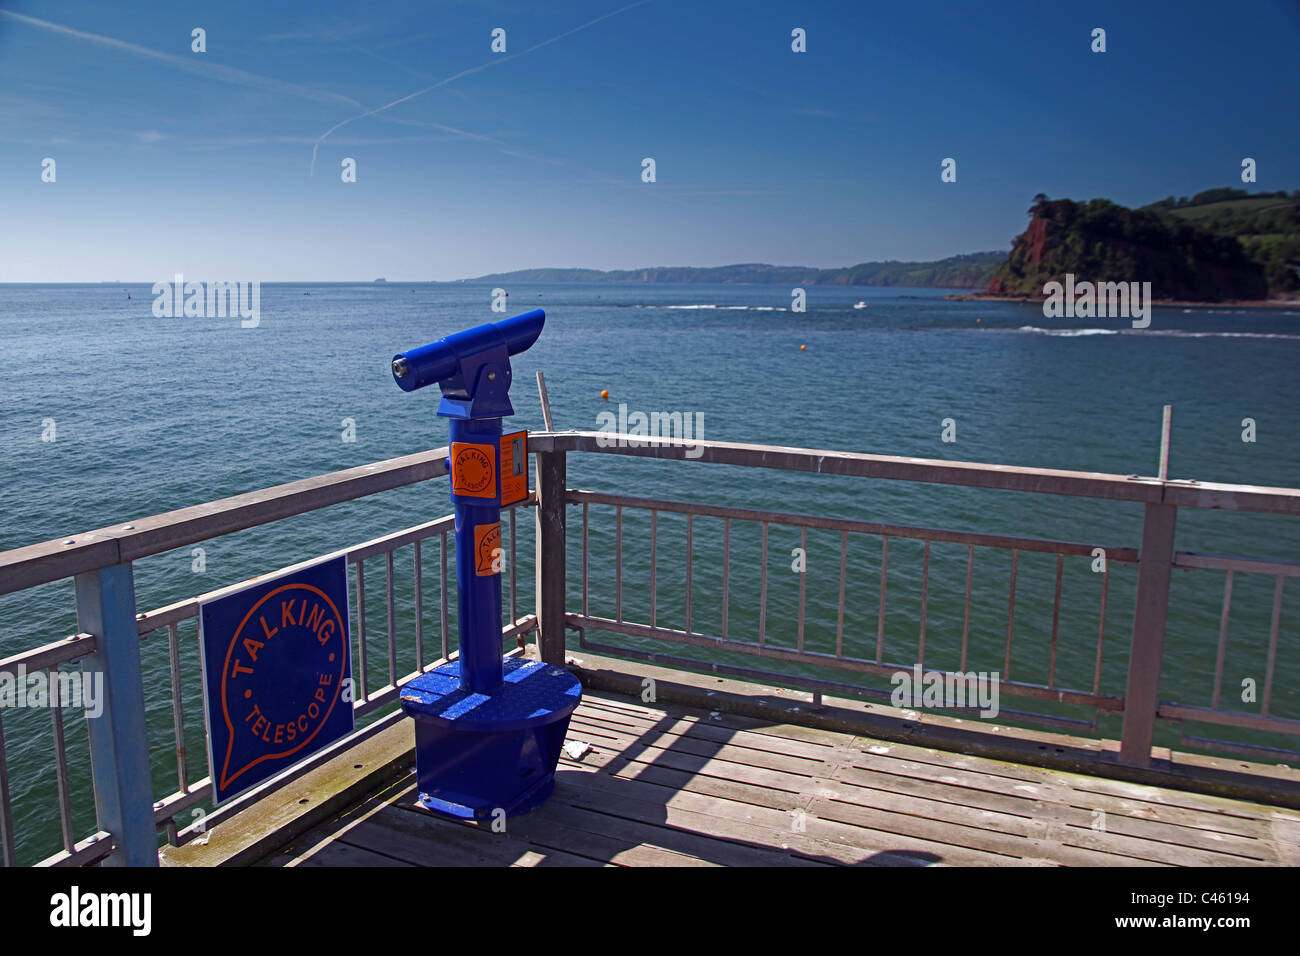 A talking telescope on the end of the Grand Pier at Teignmouth, Devon, England, UK Stock Photo